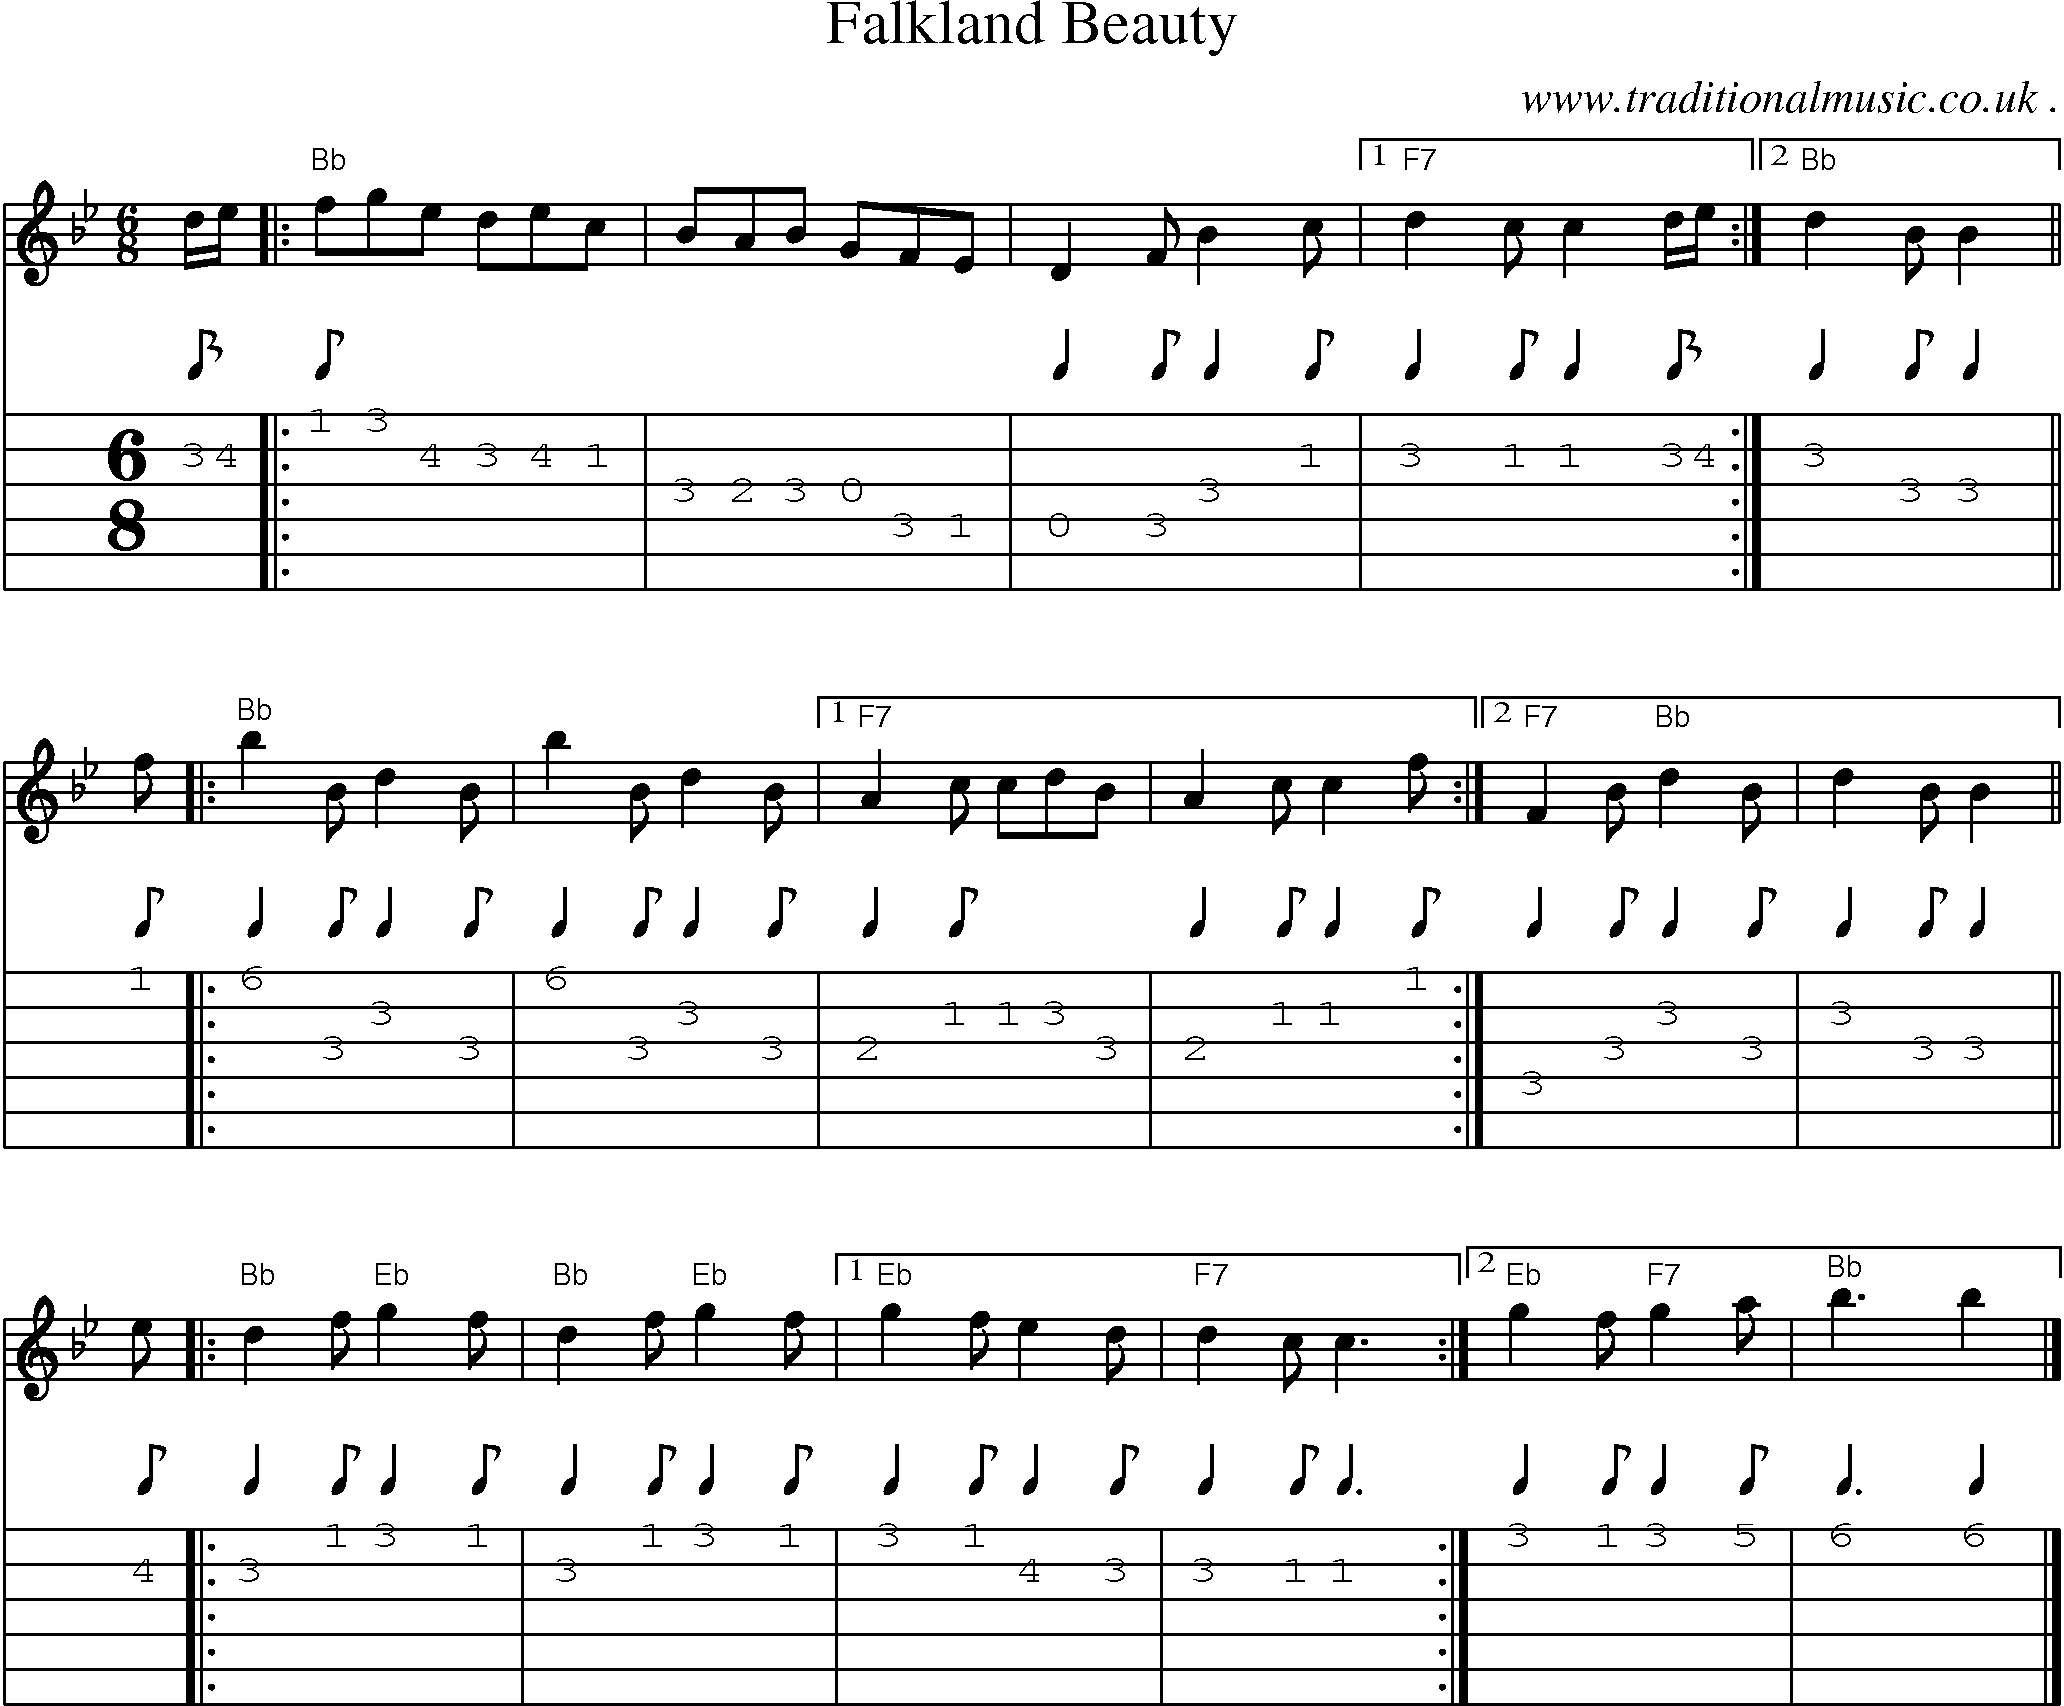 Sheet-music  score, Chords and Guitar Tabs for Falkland Beauty